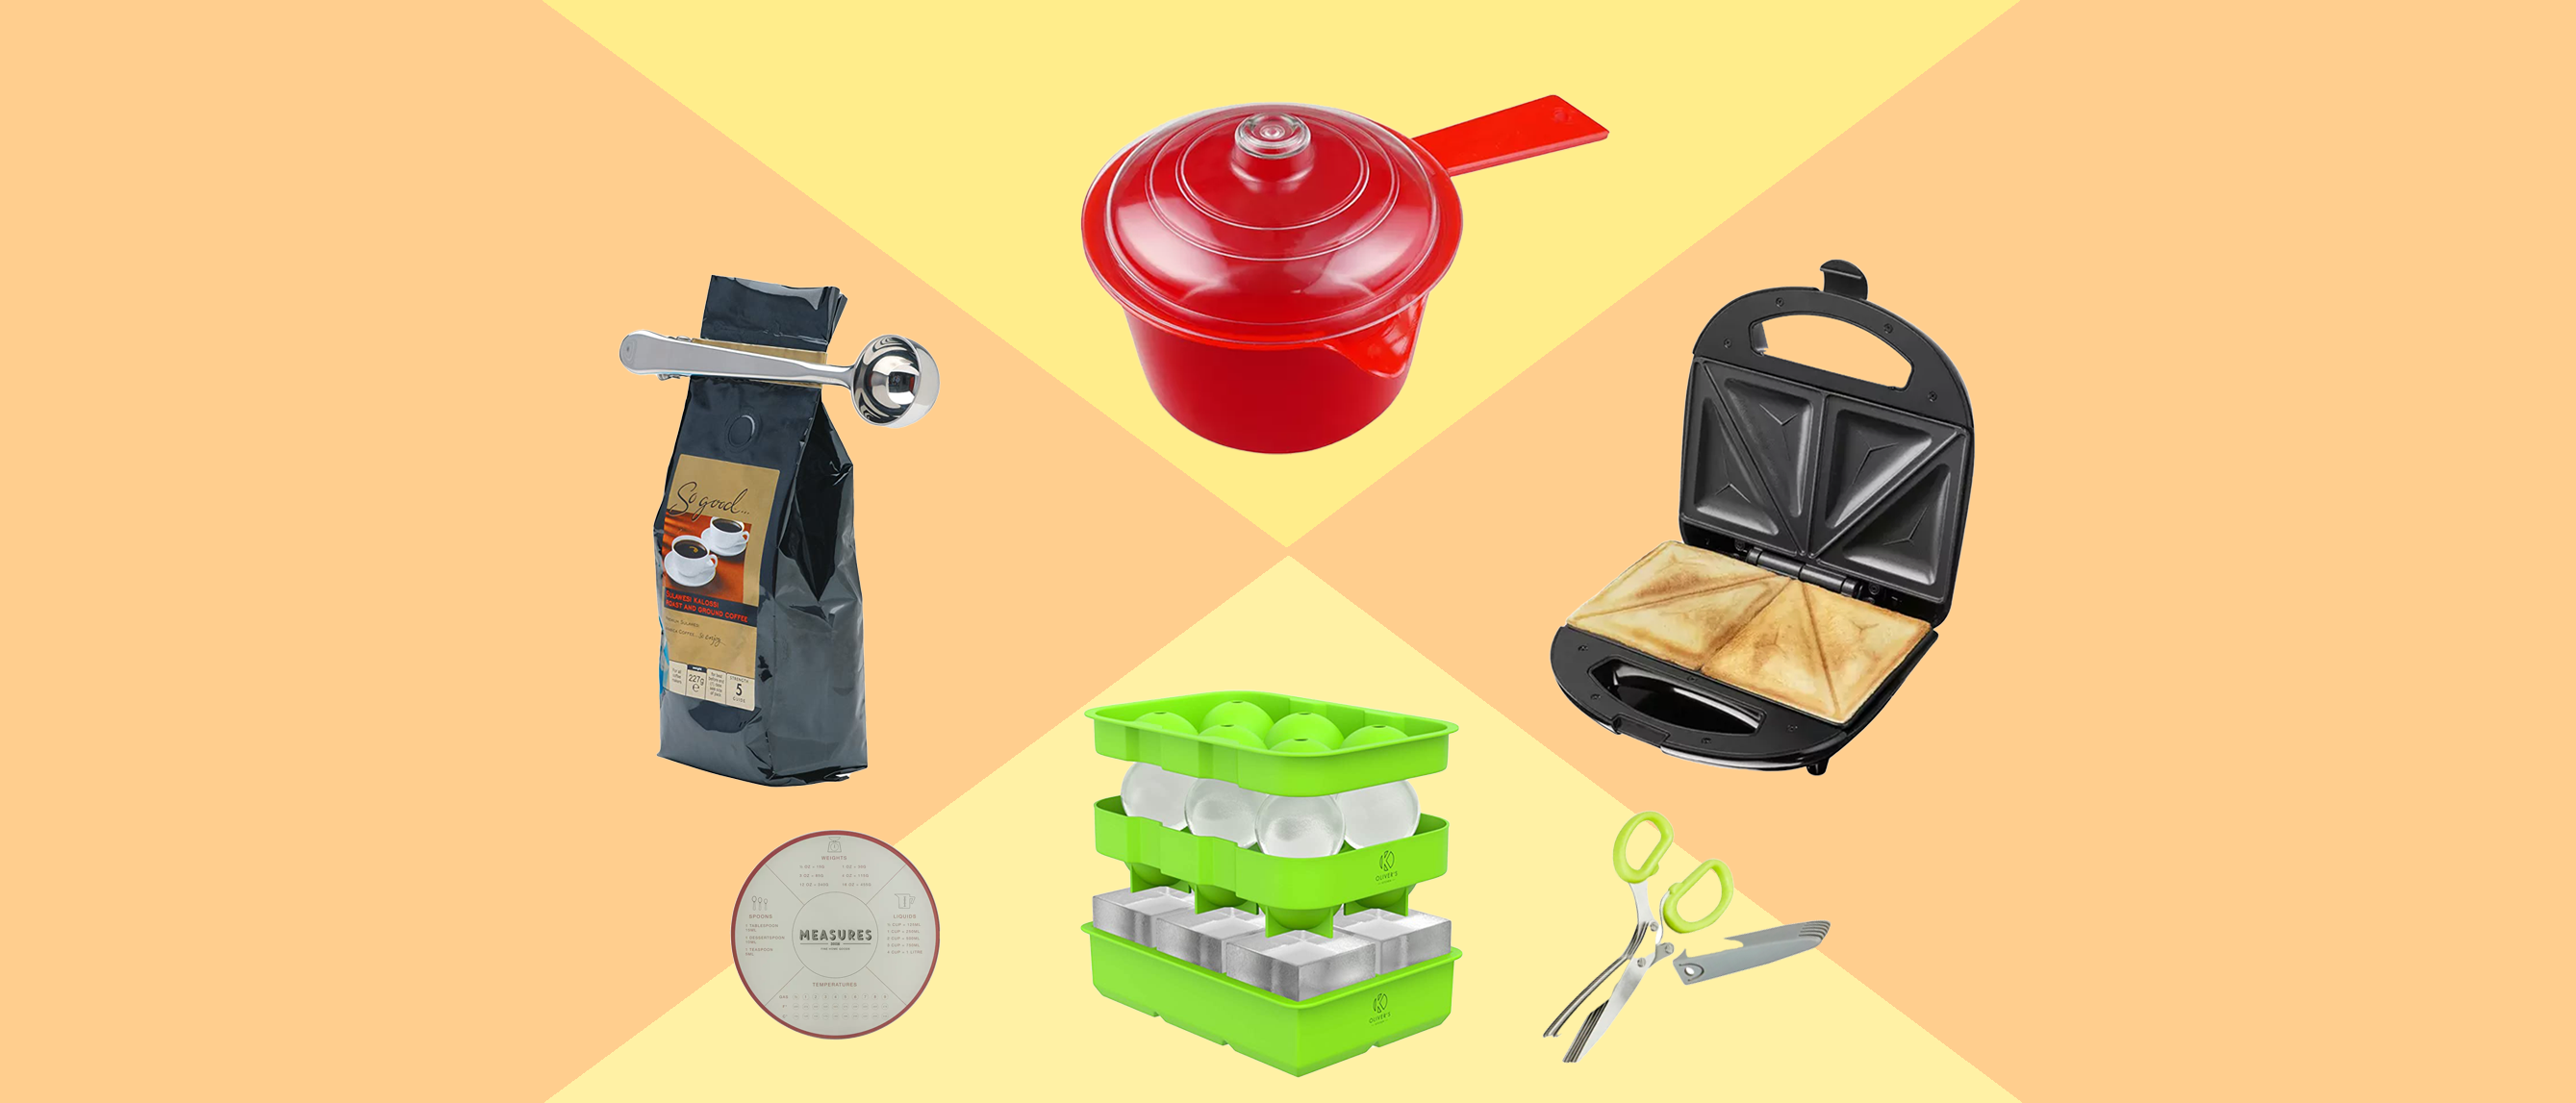 Top 10 Pokemon Go Kitchen Gadgets and Cooking Utensils - Top 10 Food and  Drinks From Around The World